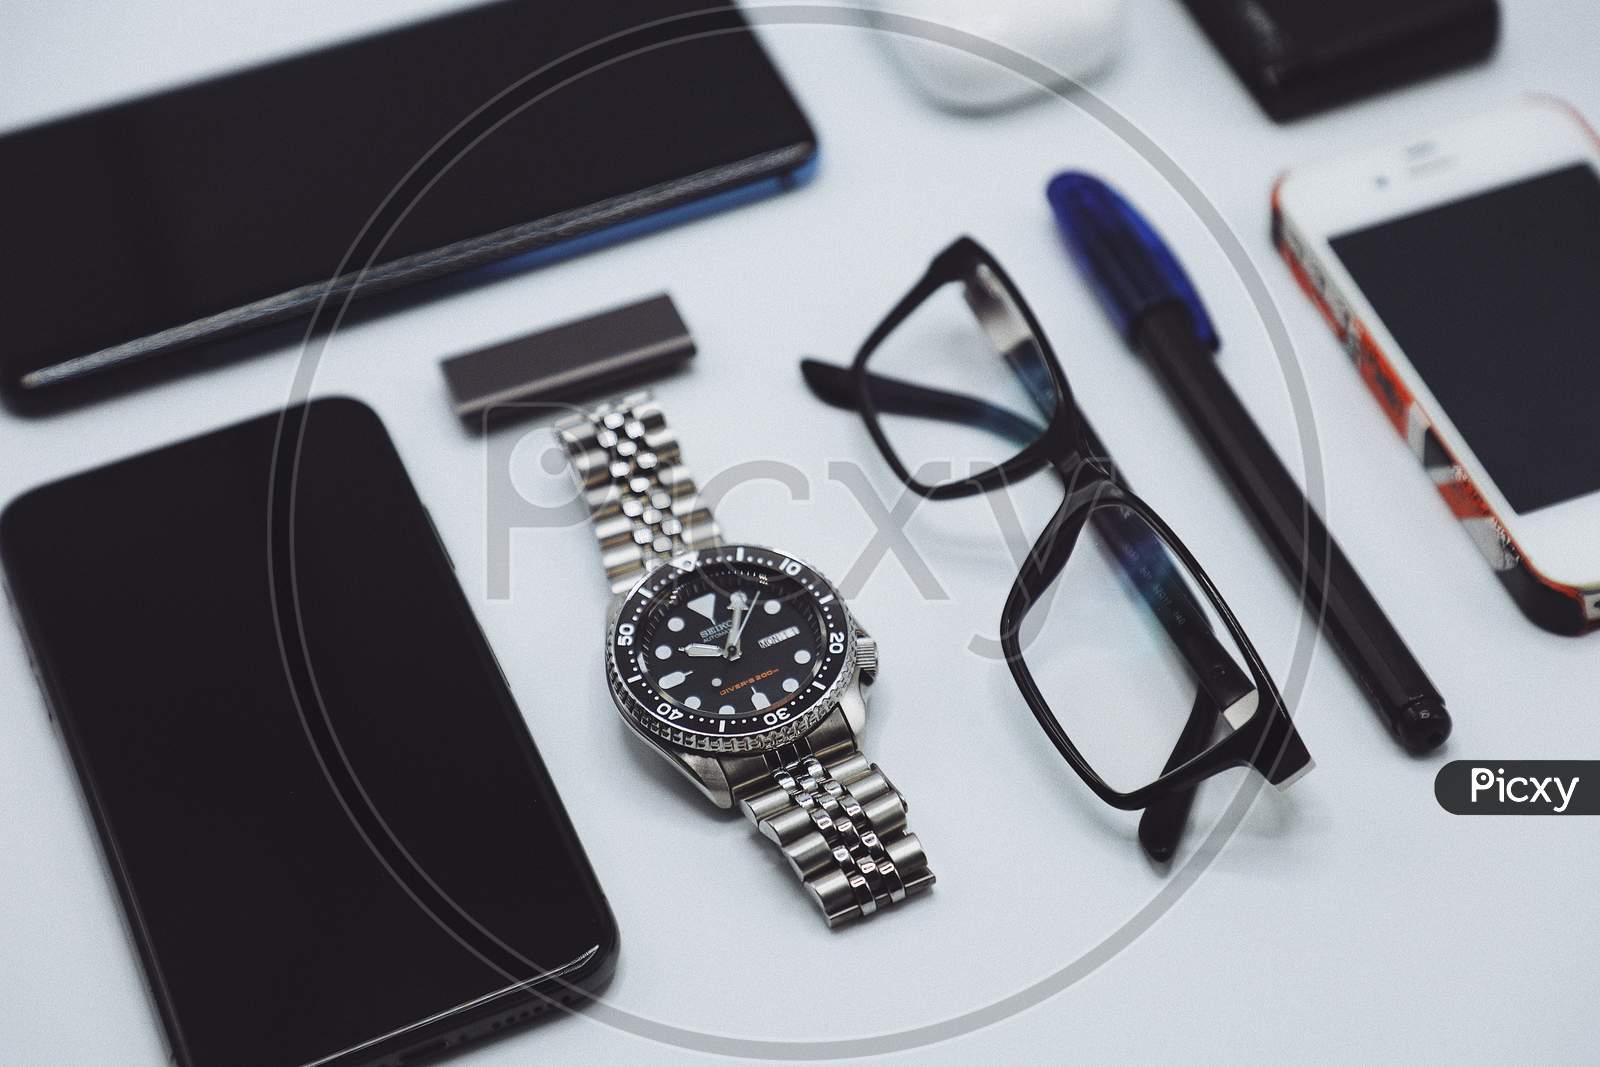 modern photography equipment over white table background